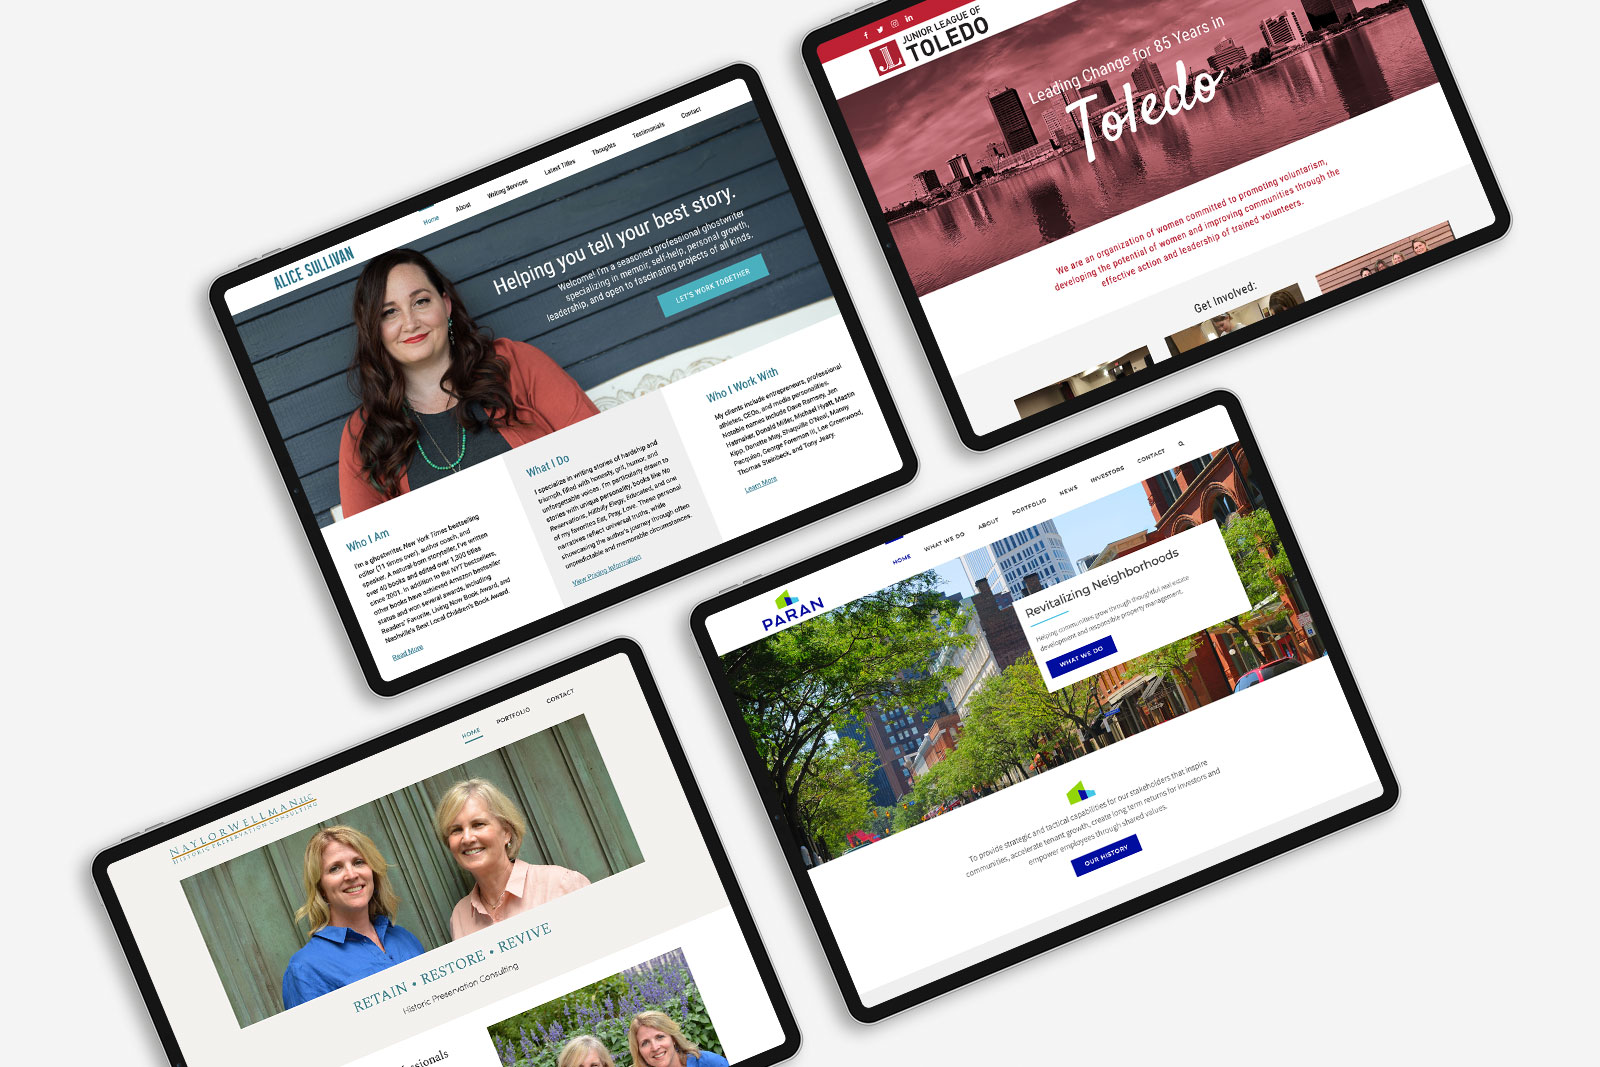 Overhead image of four tablets featuring four WordPress website design projects